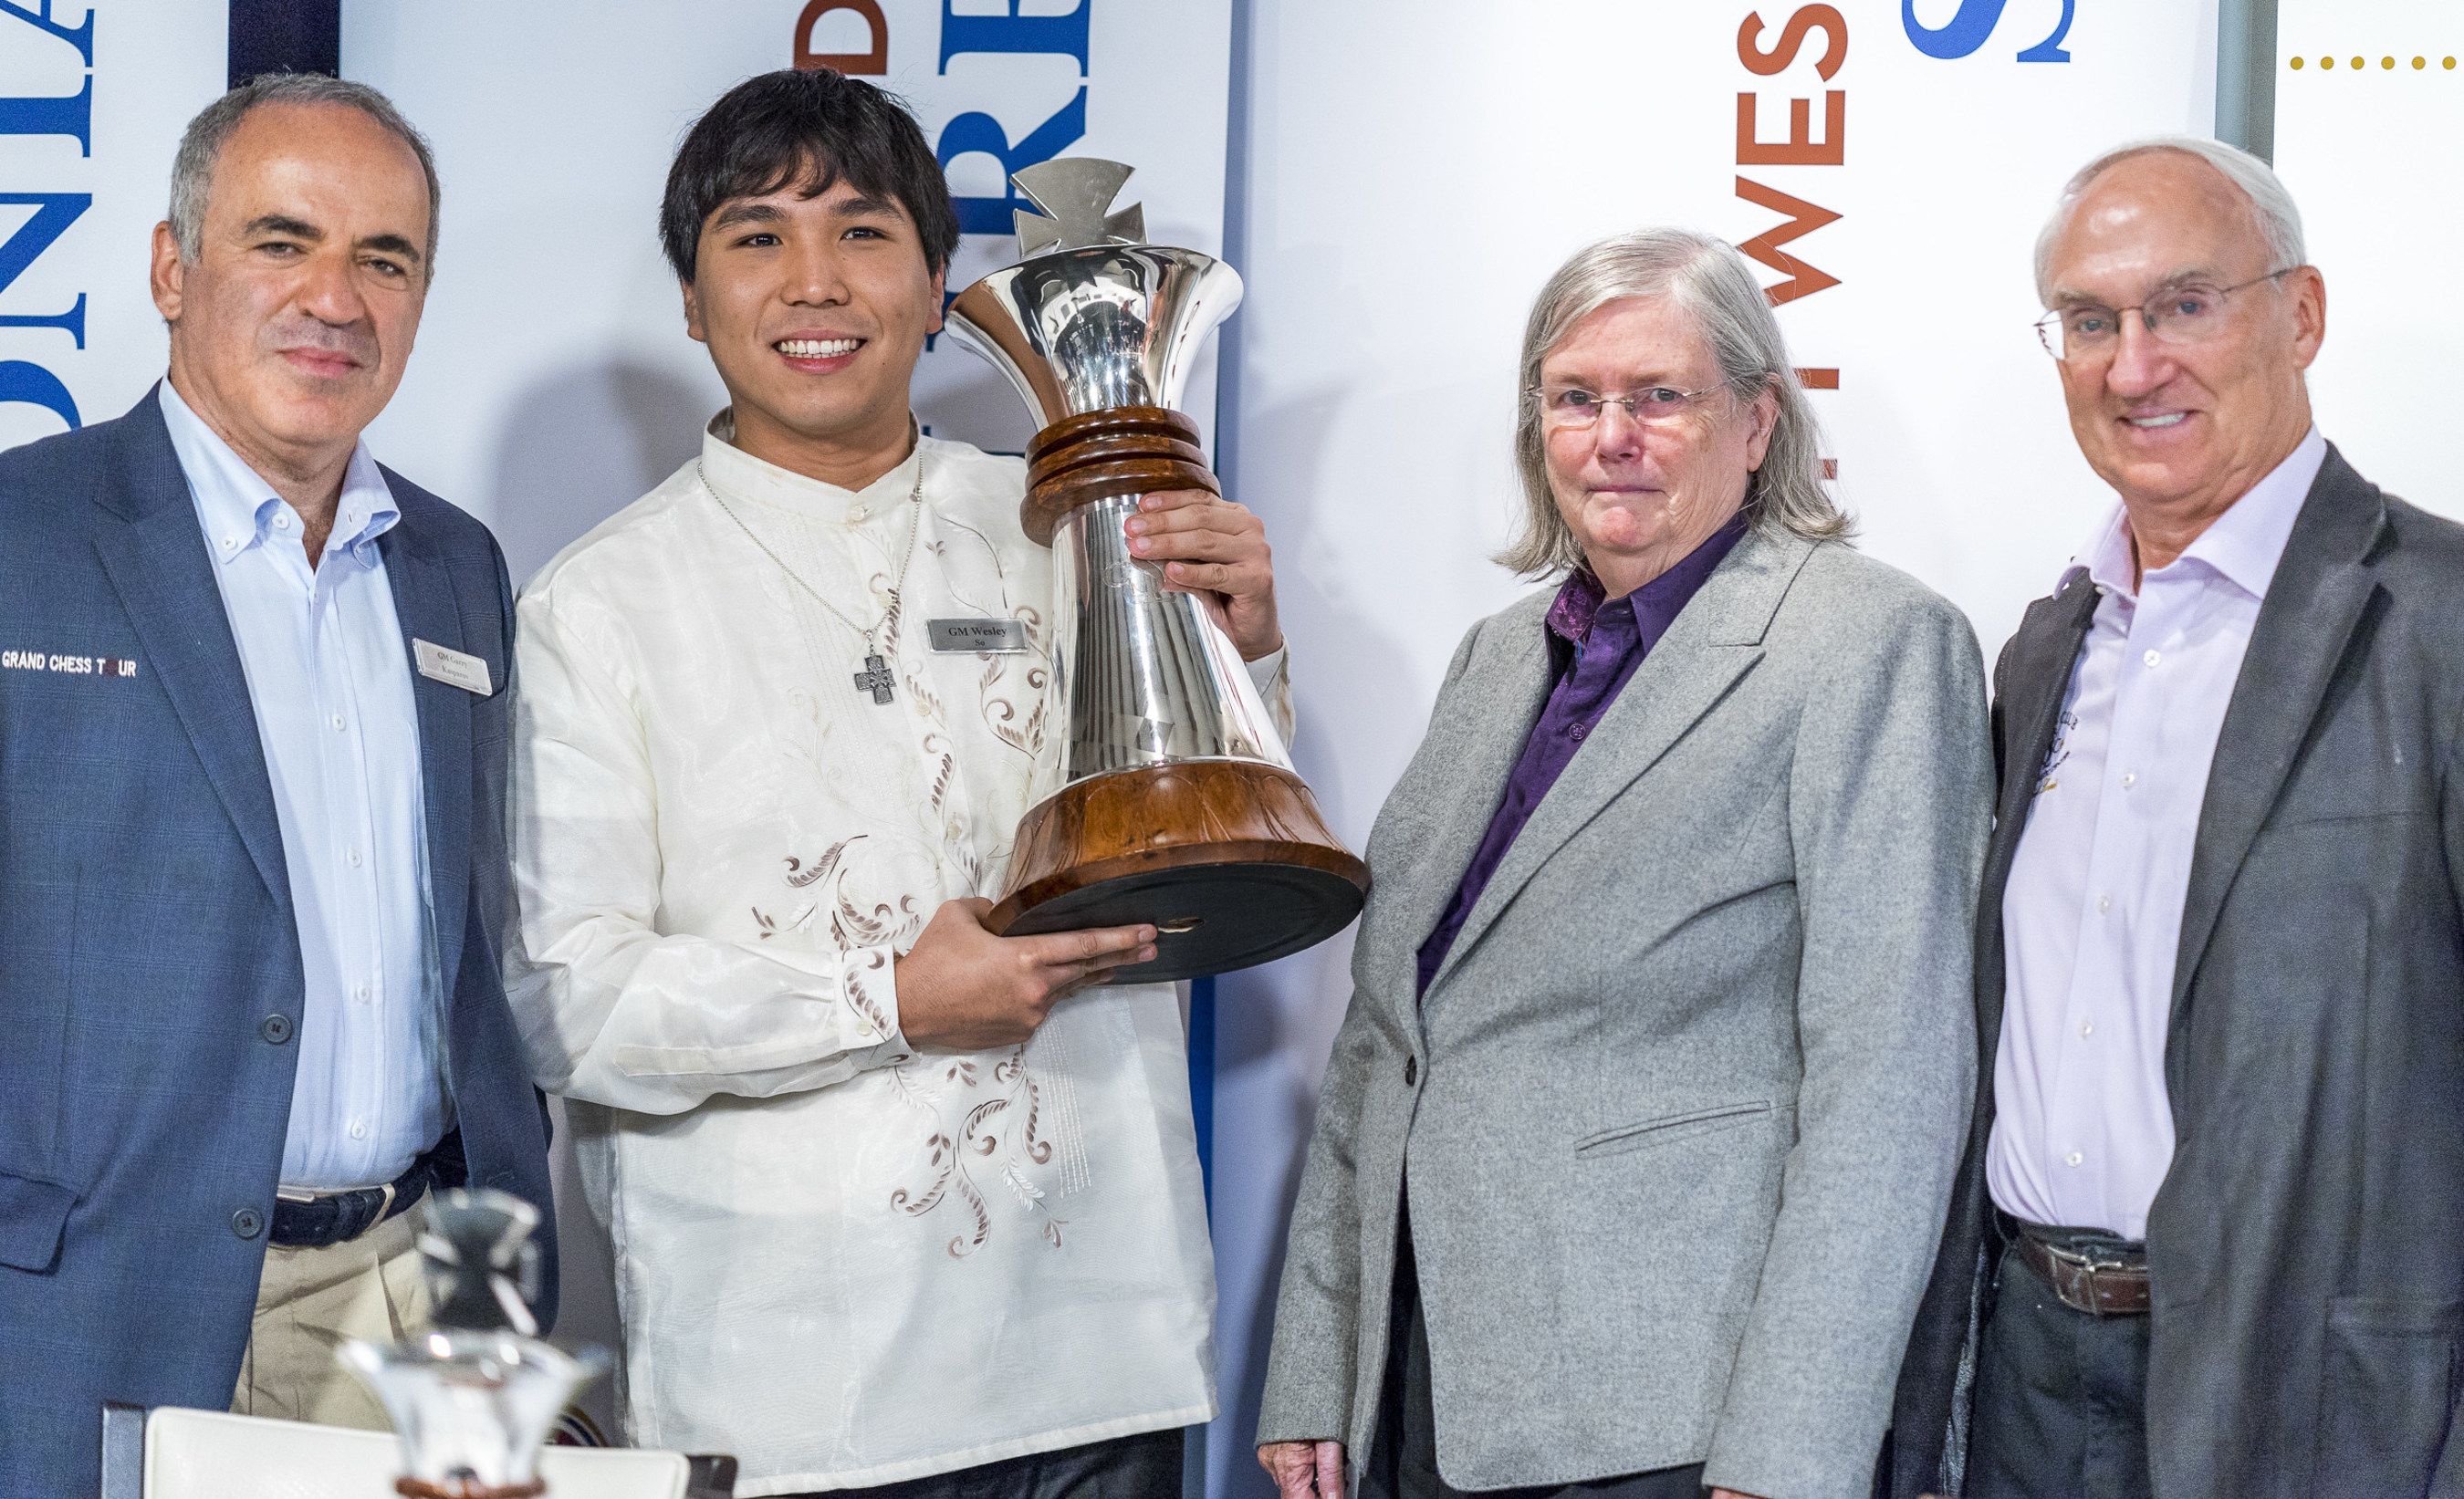 Grandmaster Garry Kasparov (left) and Dr. Jeanne and Rex Sinquefield, founders of the Chess Club and Scholastic Center of Saint Louis (right) present American Grandmaster Wesley So (center) with the Sinquefield Cup champion's trophy at the tournament's Closing Ceremony Aug. 15. The Sinquefield Cup tournament was held at the Chess Club and Scholastic Center of Saint Louis, and is the third of four stops - and the sole U.S. stop - on the international Grand Chess Tour circuit.